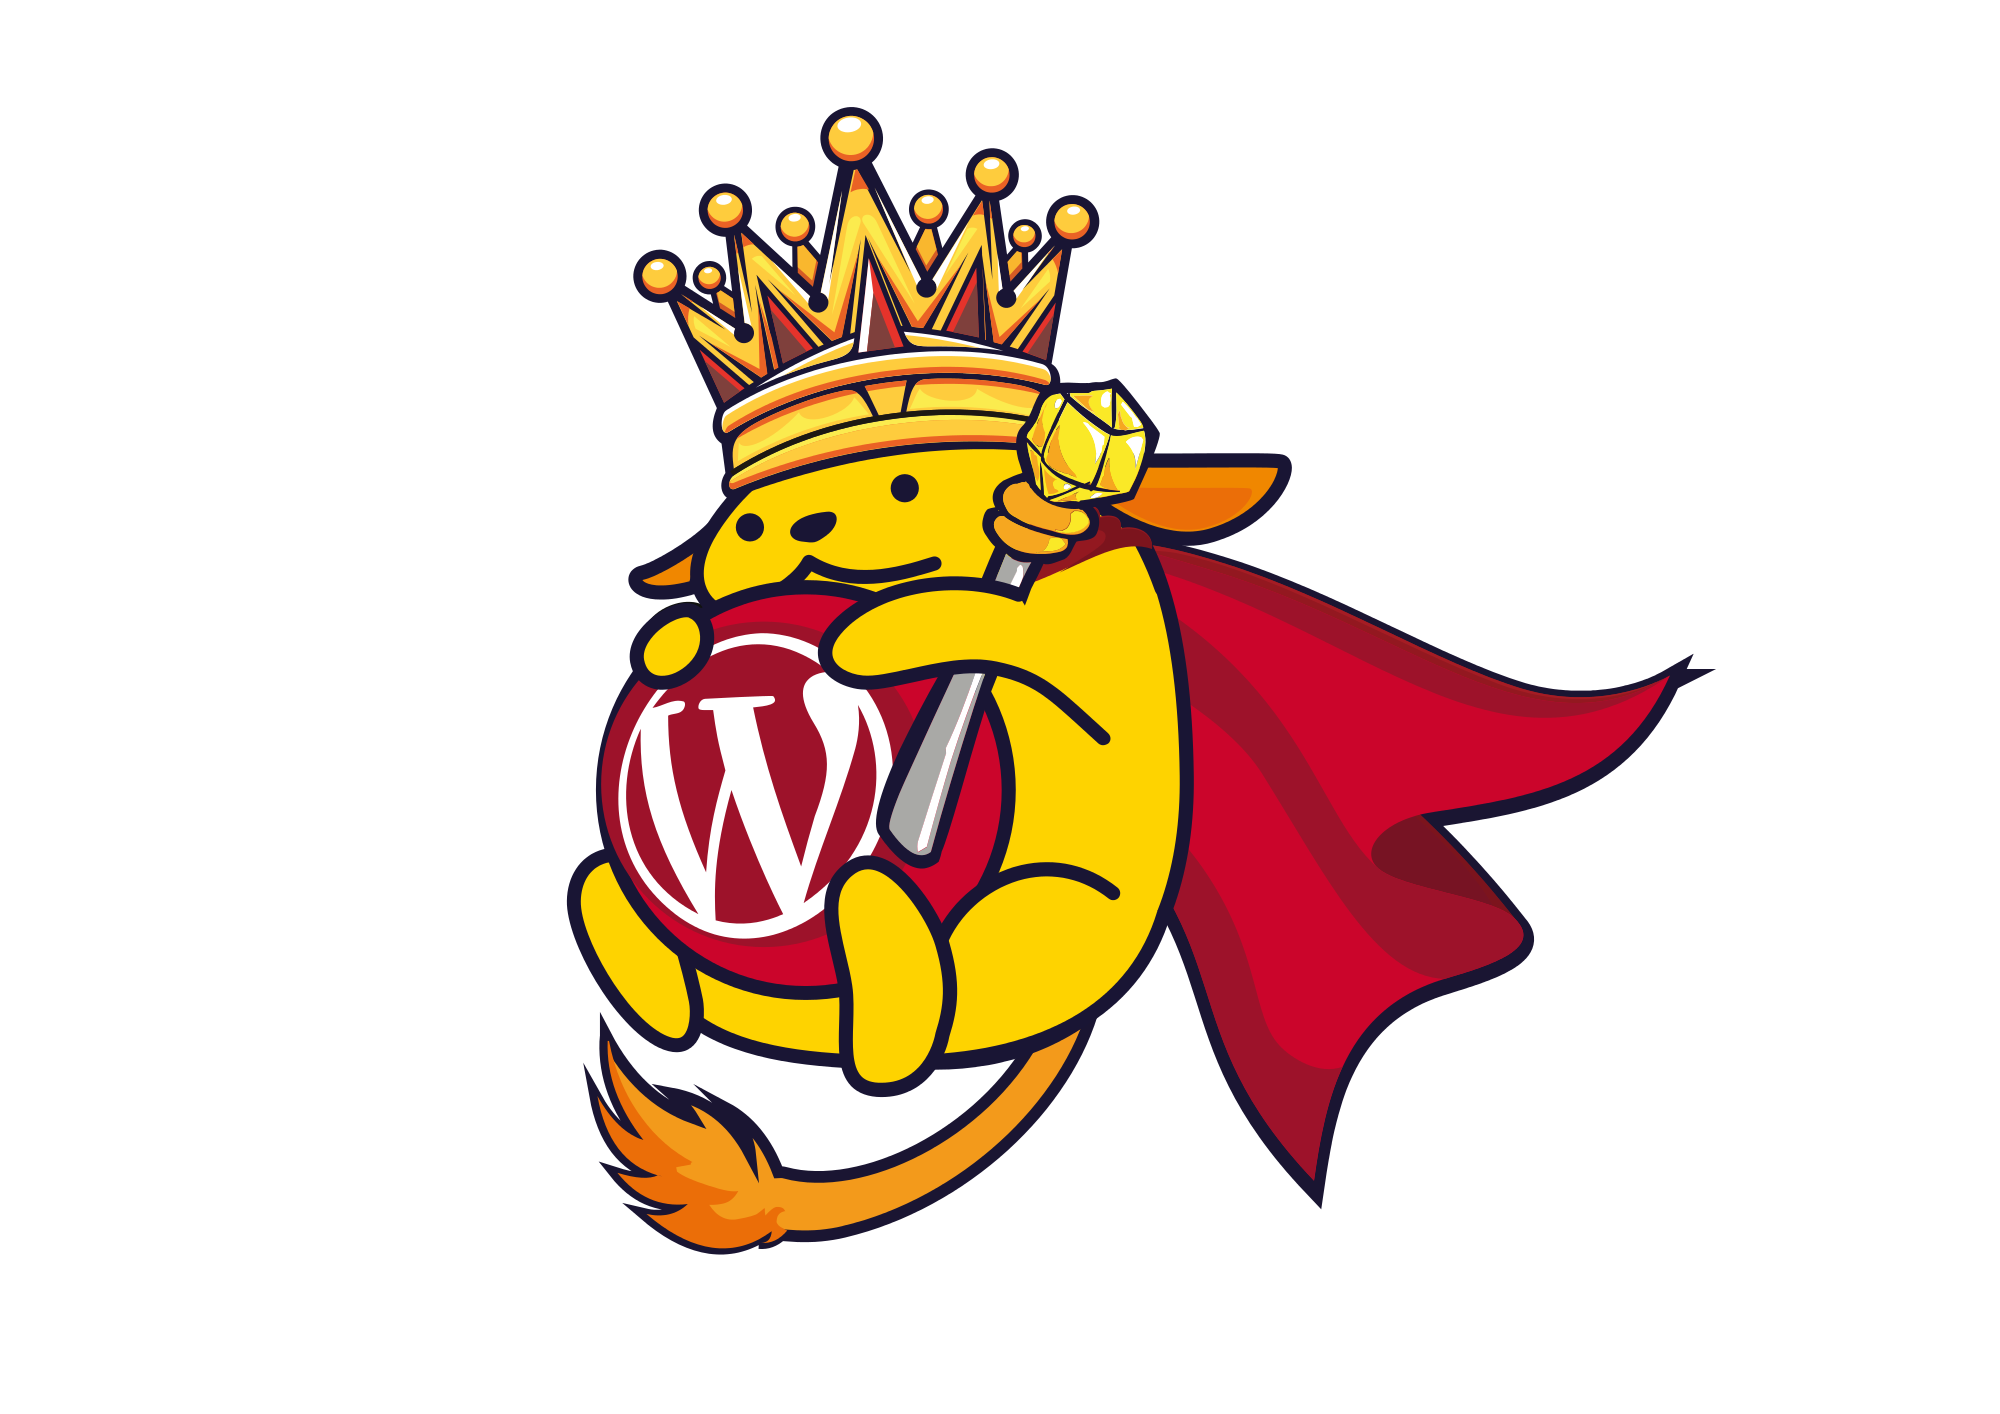 king clipart svg